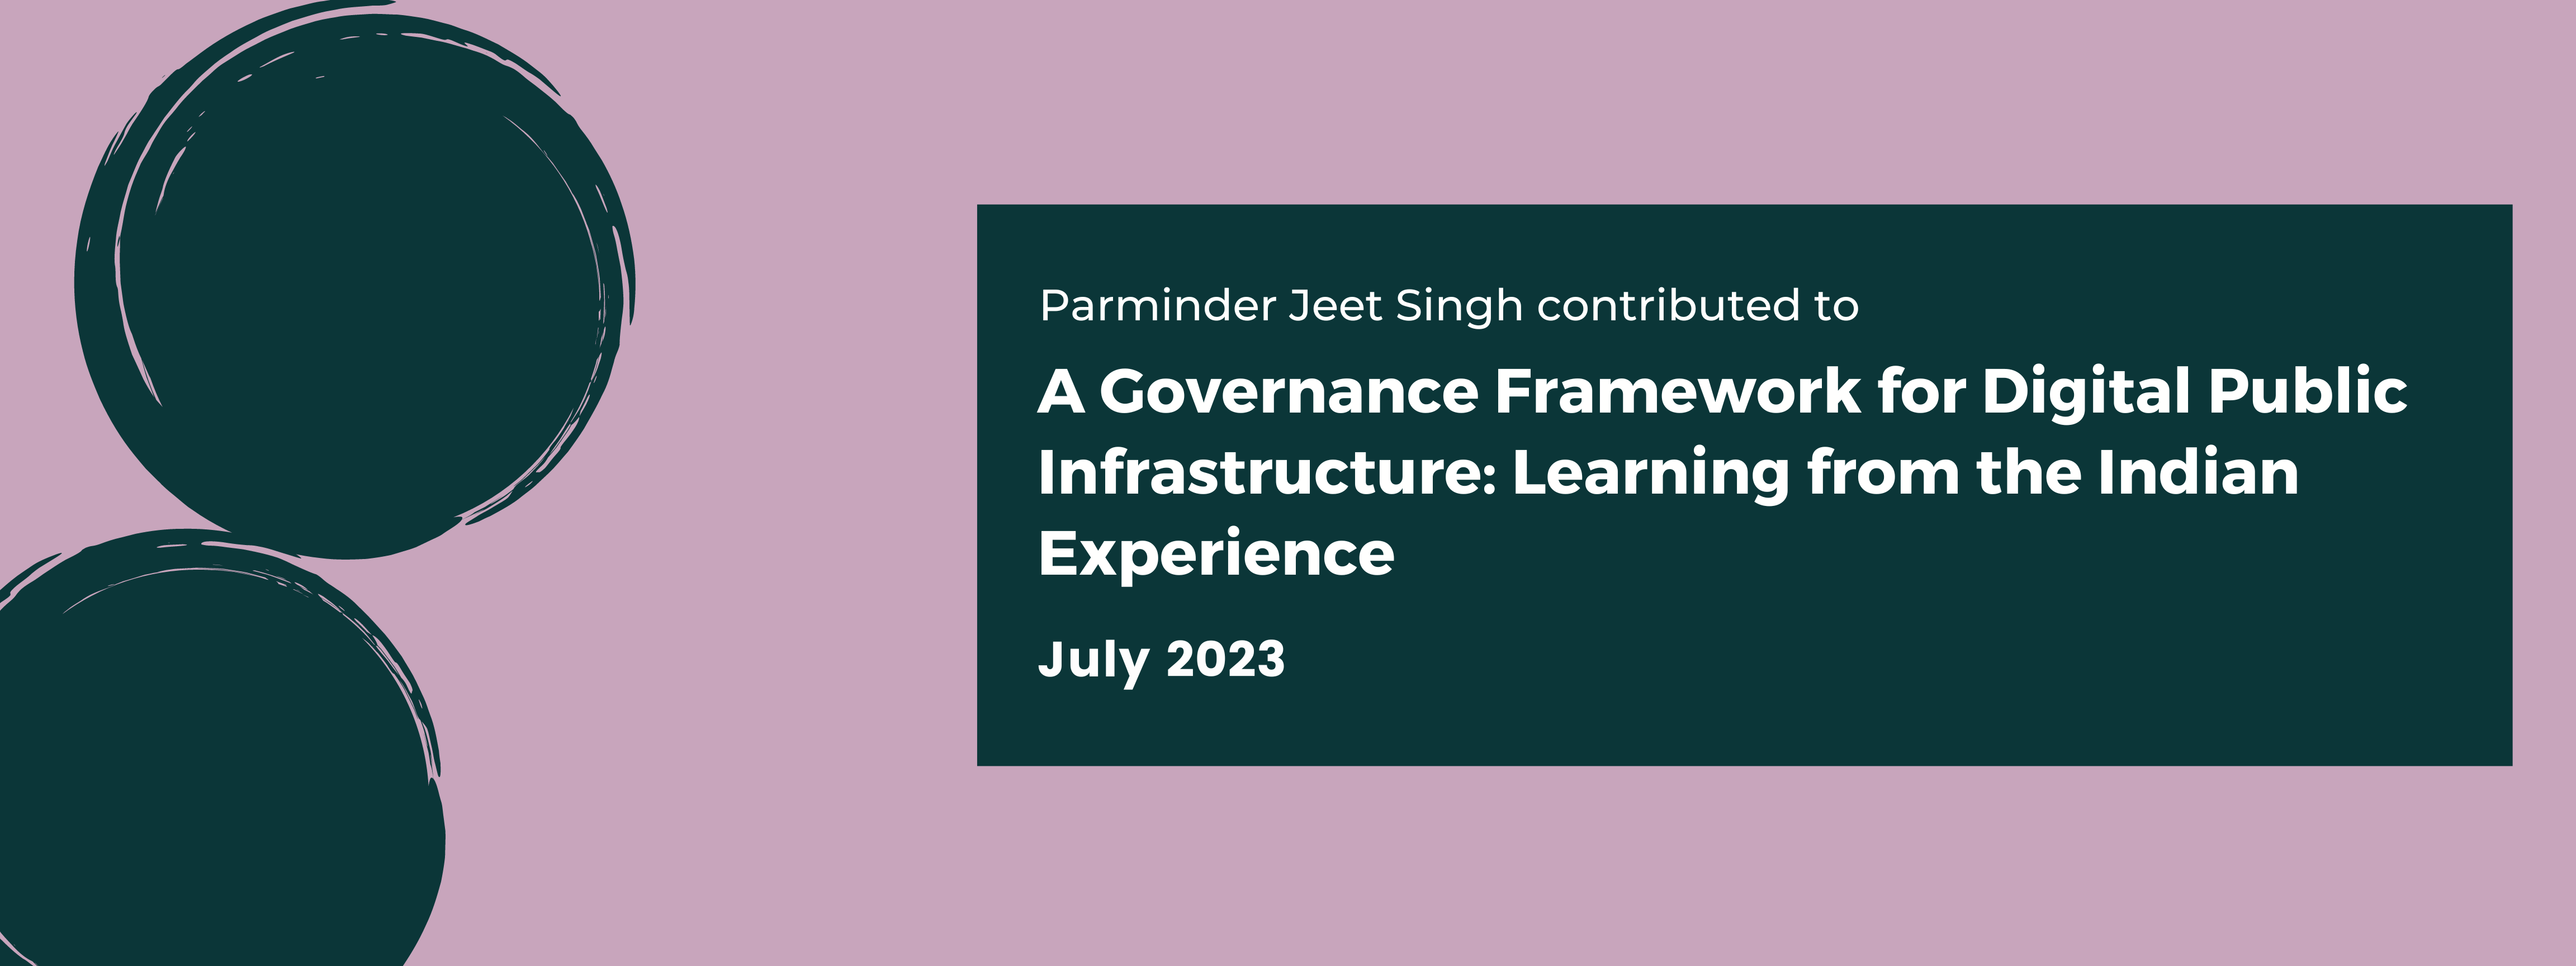 A Governance Framework for Digital Public Infrastructure: Learning from the Indian Experience